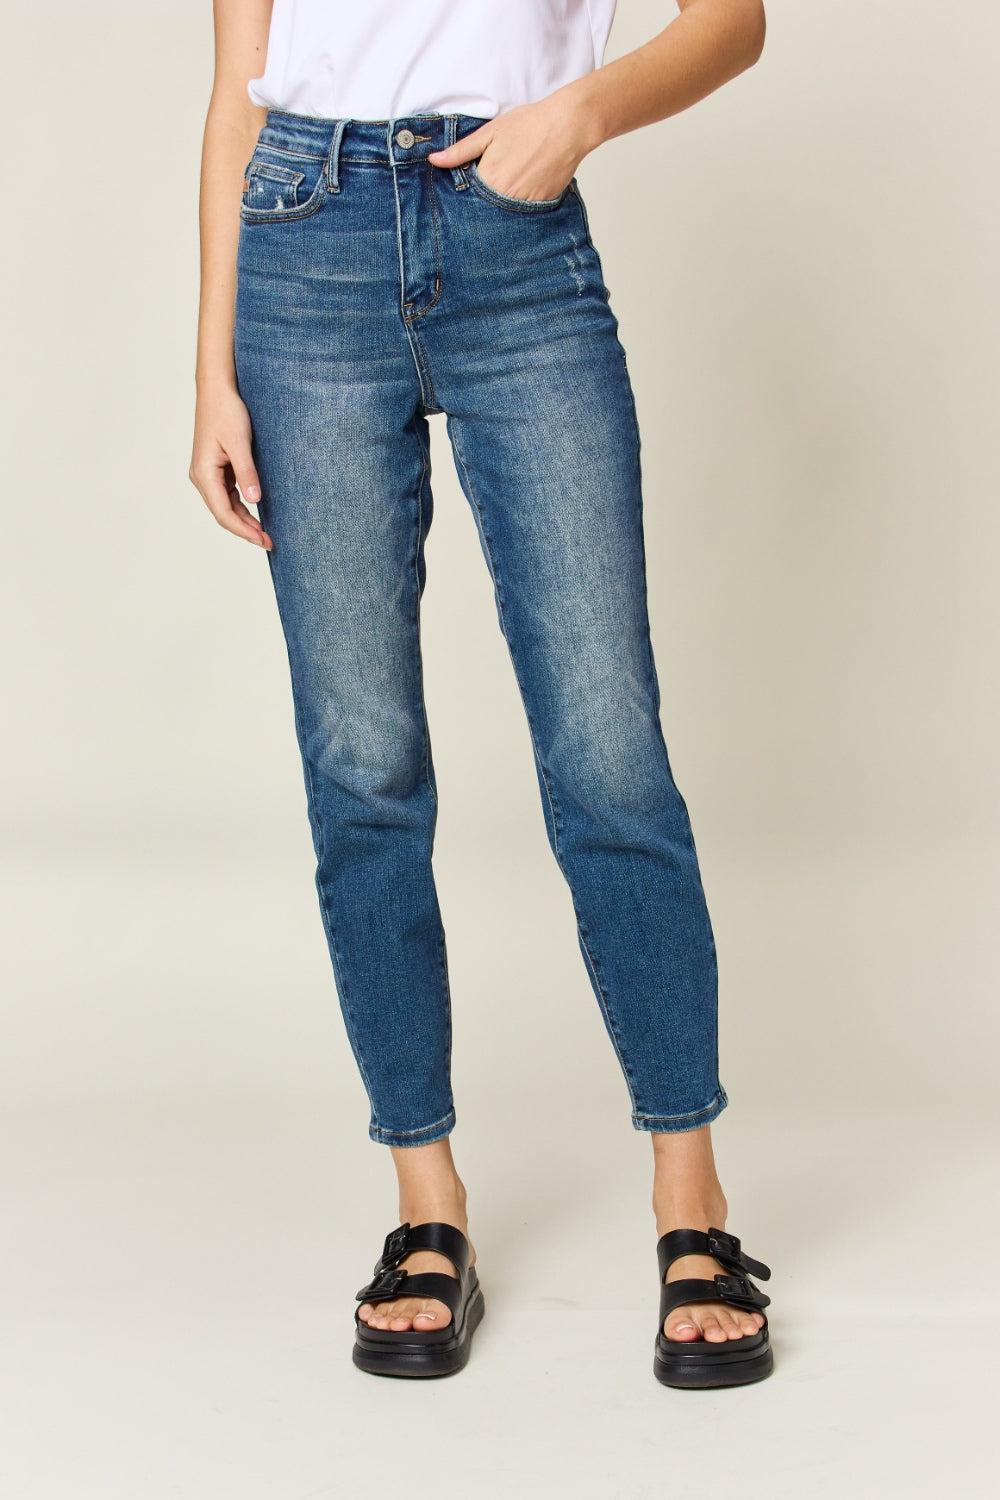 Judy Blue Slim Fit Jeans - Tummy Control - High Rise - Inspired Eye Boutique